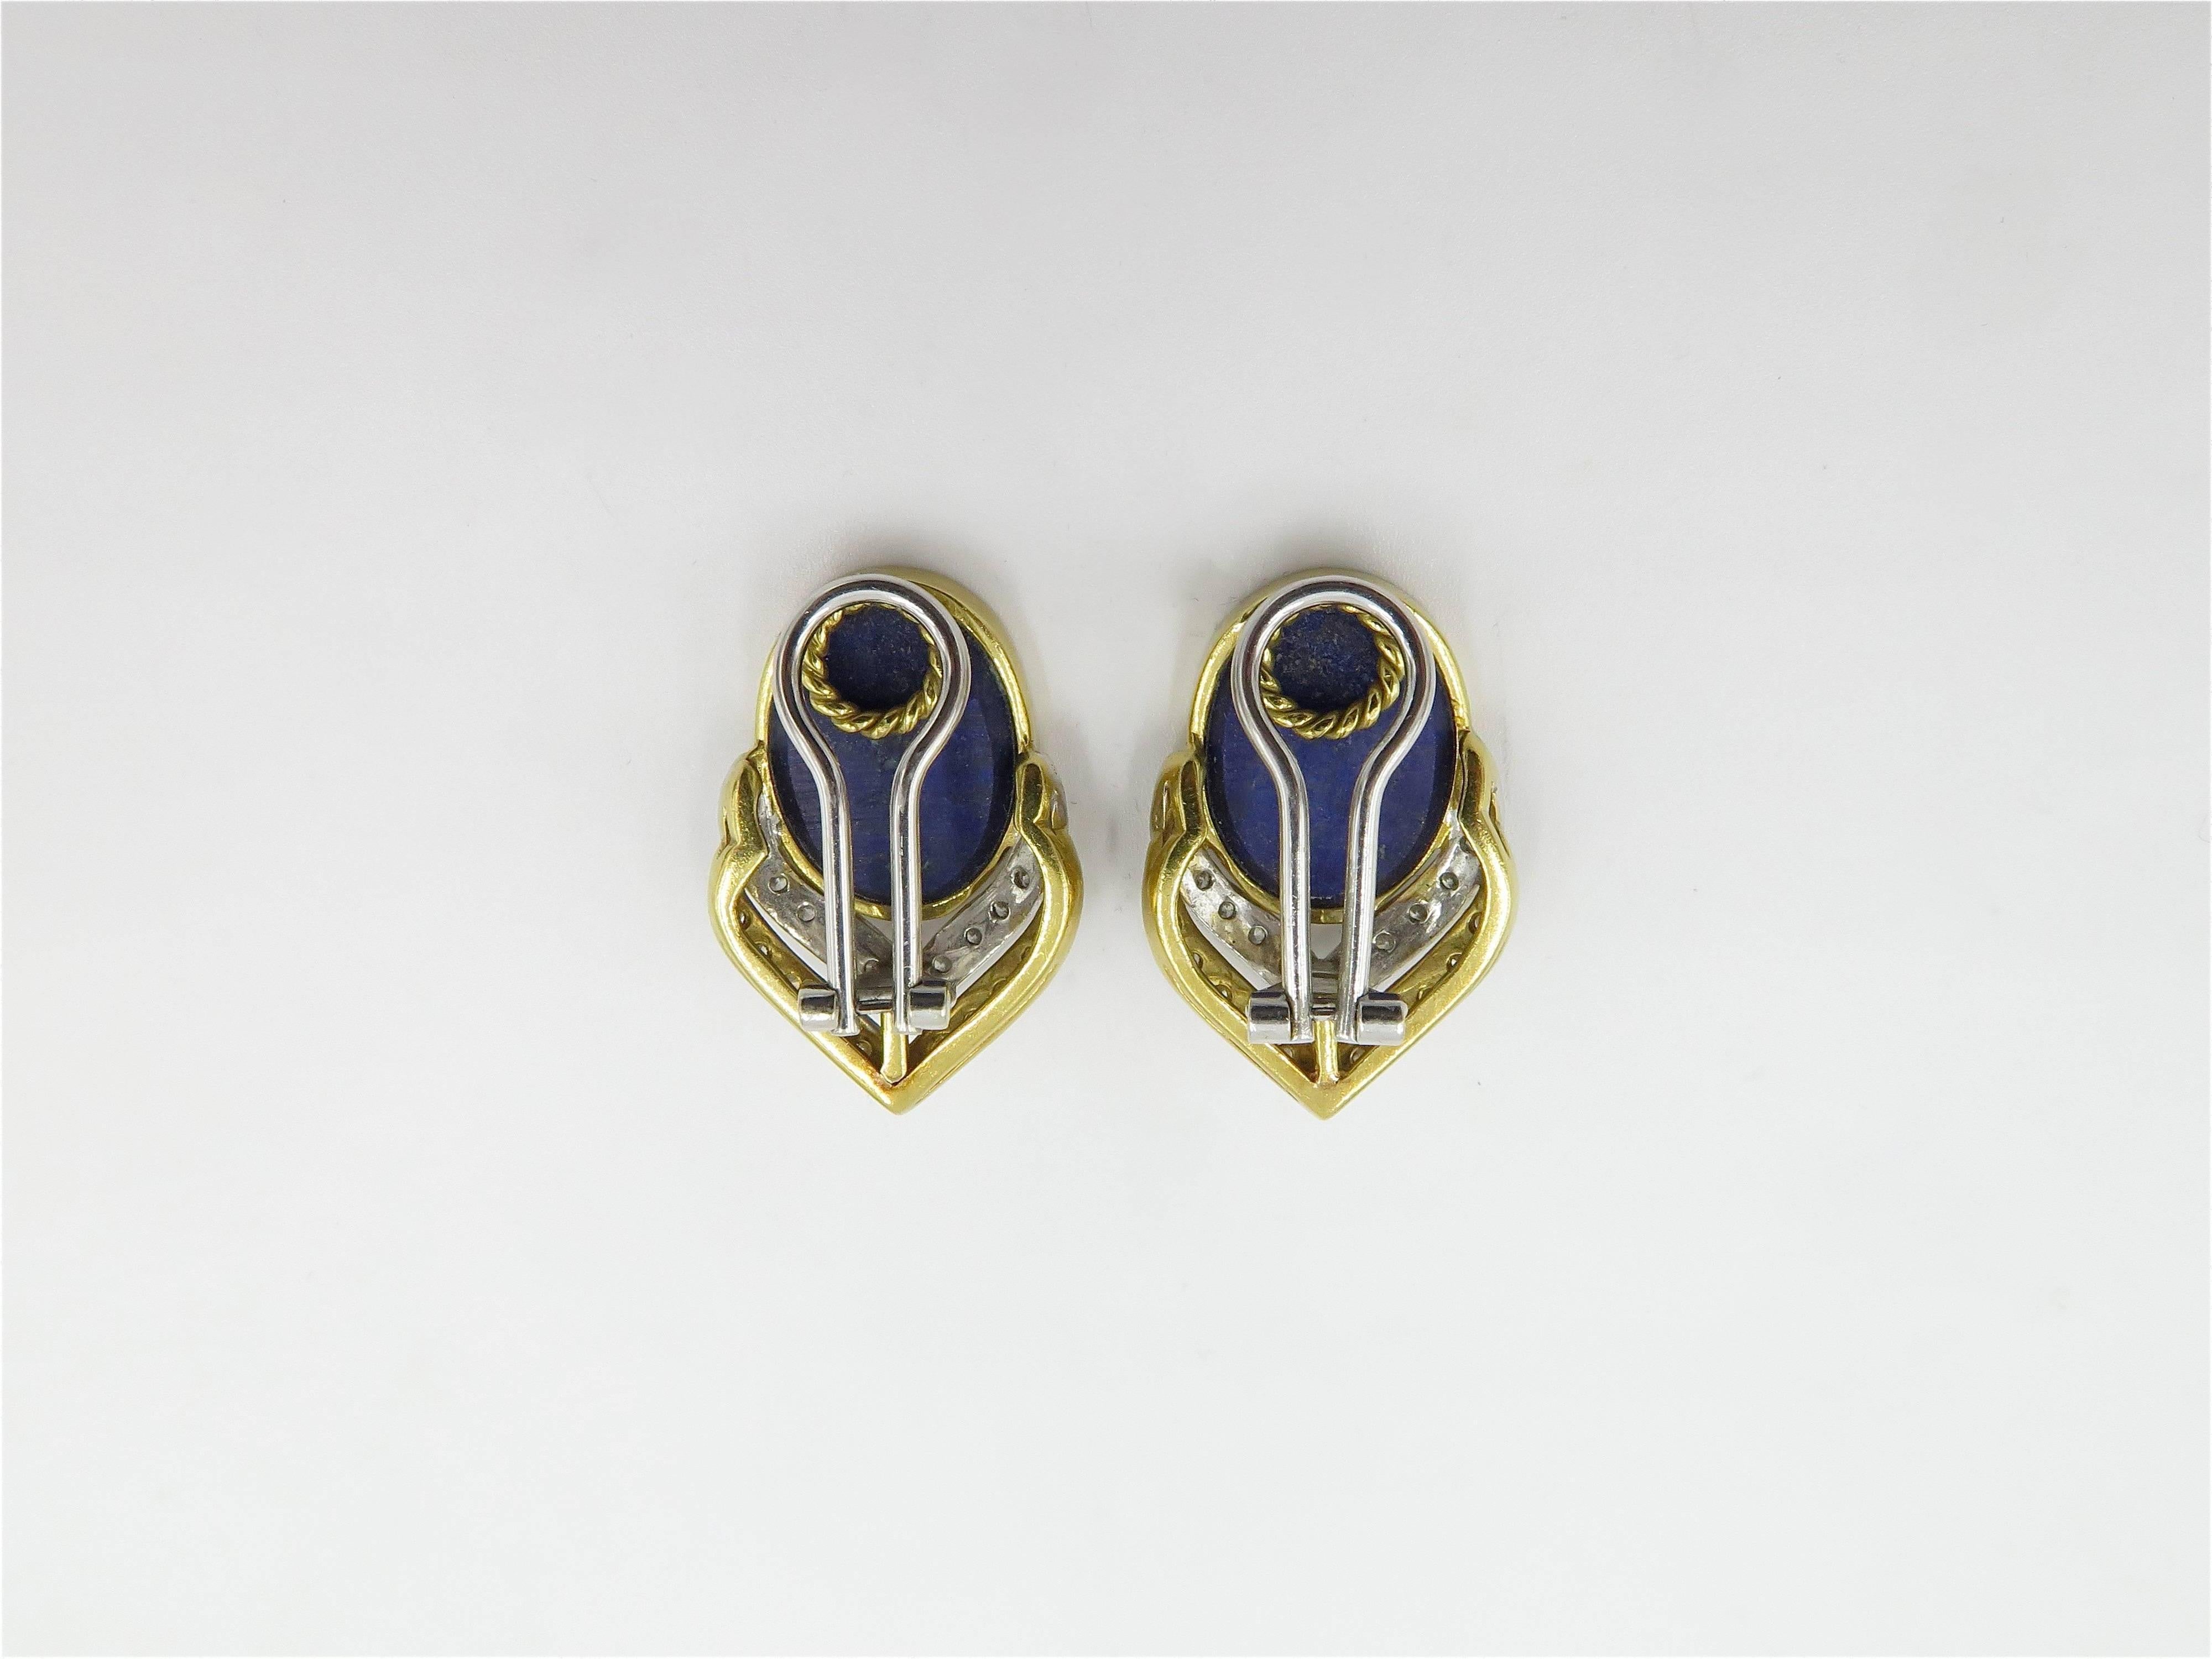 A pair of 18 karat yellow gold, white gold, lapis lazuli and diamond earrings. Italian. Each set with an oval lapis lazuli plaque, within a polished gold bezel, set to the bottom with pave set diamond V shaped motifs. Forty eight (48) diamonds weigh